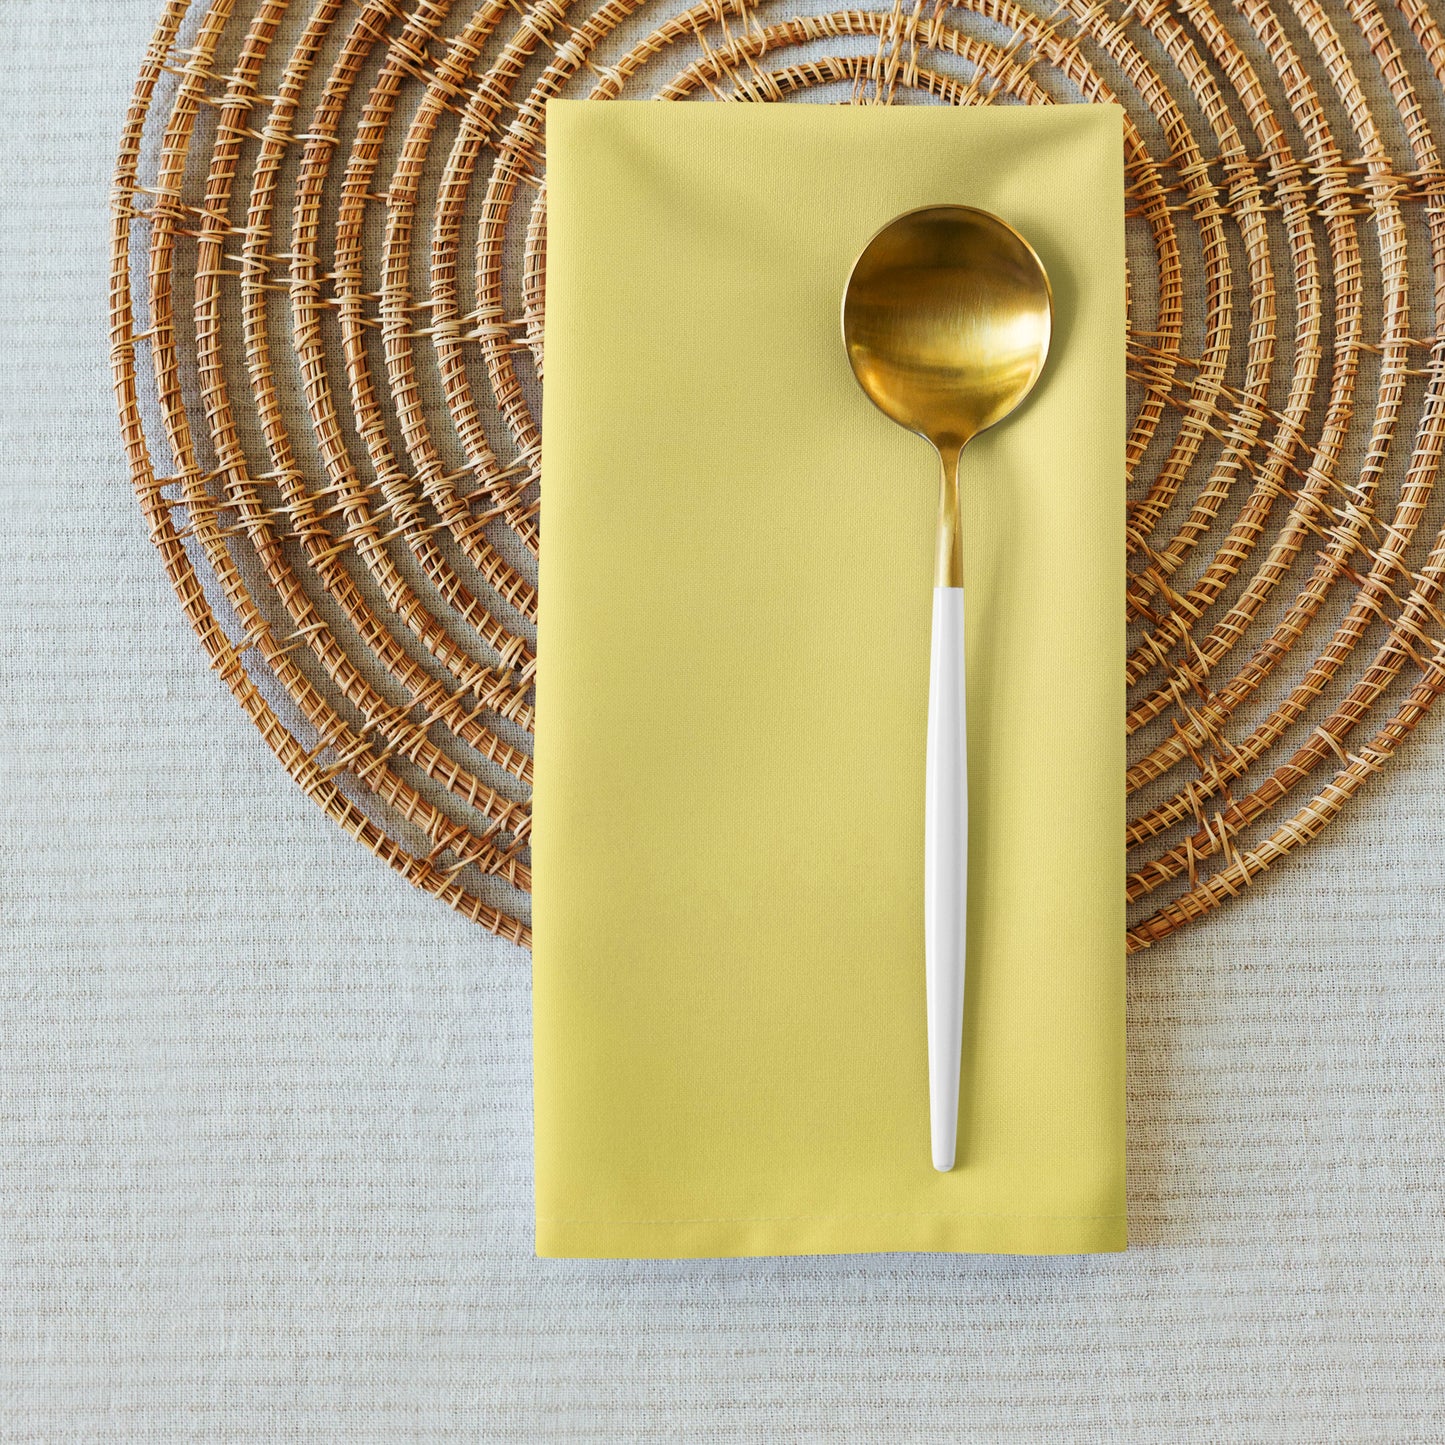 Yellow cloth napkin with gold spoon placed on it, sitting on round placemat.